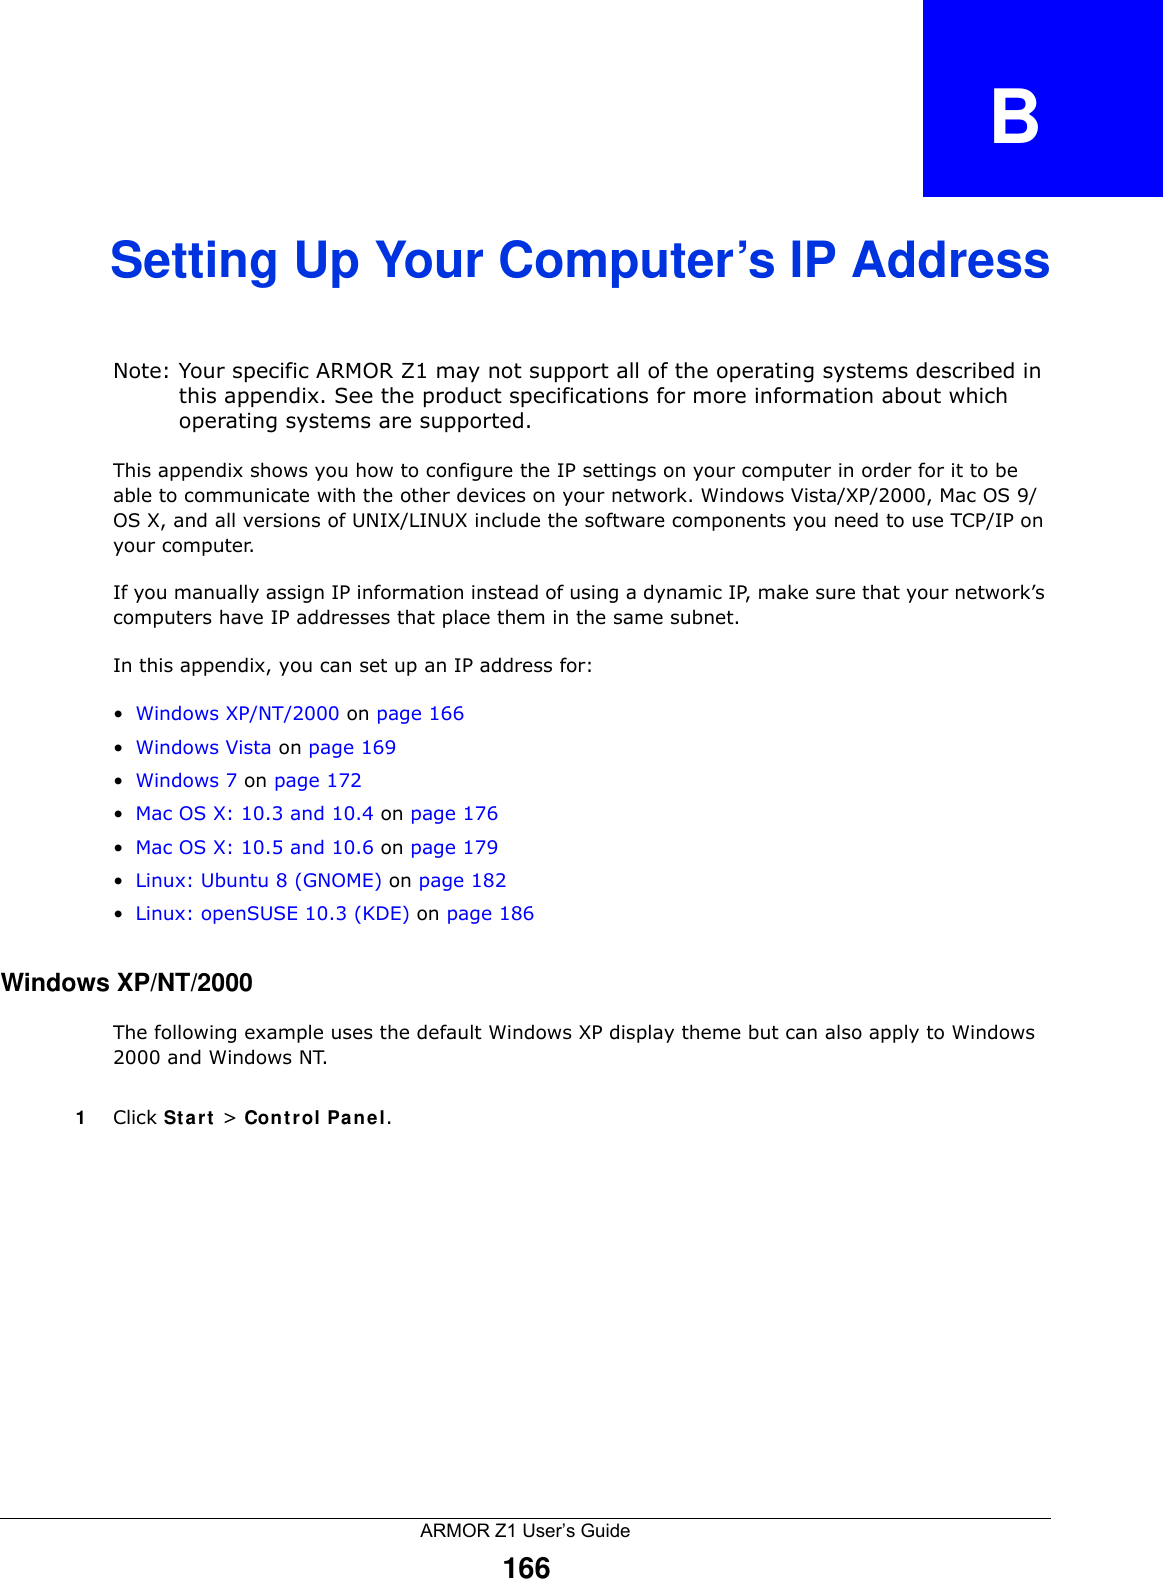 ARMOR Z1 User’s Guide166APPENDIX   BSetting Up Your Computer’s IP AddressNote: Your specific ARMOR Z1 may not support all of the operating systems described in this appendix. See the product specifications for more information about which operating systems are supported.This appendix shows you how to configure the IP settings on your computer in order for it to be able to communicate with the other devices on your network. Windows Vista/XP/2000, Mac OS 9/OS X, and all versions of UNIX/LINUX include the software components you need to use TCP/IP on your computer. If you manually assign IP information instead of using a dynamic IP, make sure that your network’s computers have IP addresses that place them in the same subnet.In this appendix, you can set up an IP address for:•Windows XP/NT/2000 on page 166•Windows Vista on page 169•Windows 7 on page 172•Mac OS X: 10.3 and 10.4 on page 176•Mac OS X: 10.5 and 10.6 on page 179•Linux: Ubuntu 8 (GNOME) on page 182•Linux: openSUSE 10.3 (KDE) on page 186Windows XP/NT/2000The following example uses the default Windows XP display theme but can also apply to Windows 2000 and Windows NT.1Click Start &gt; Control Panel.